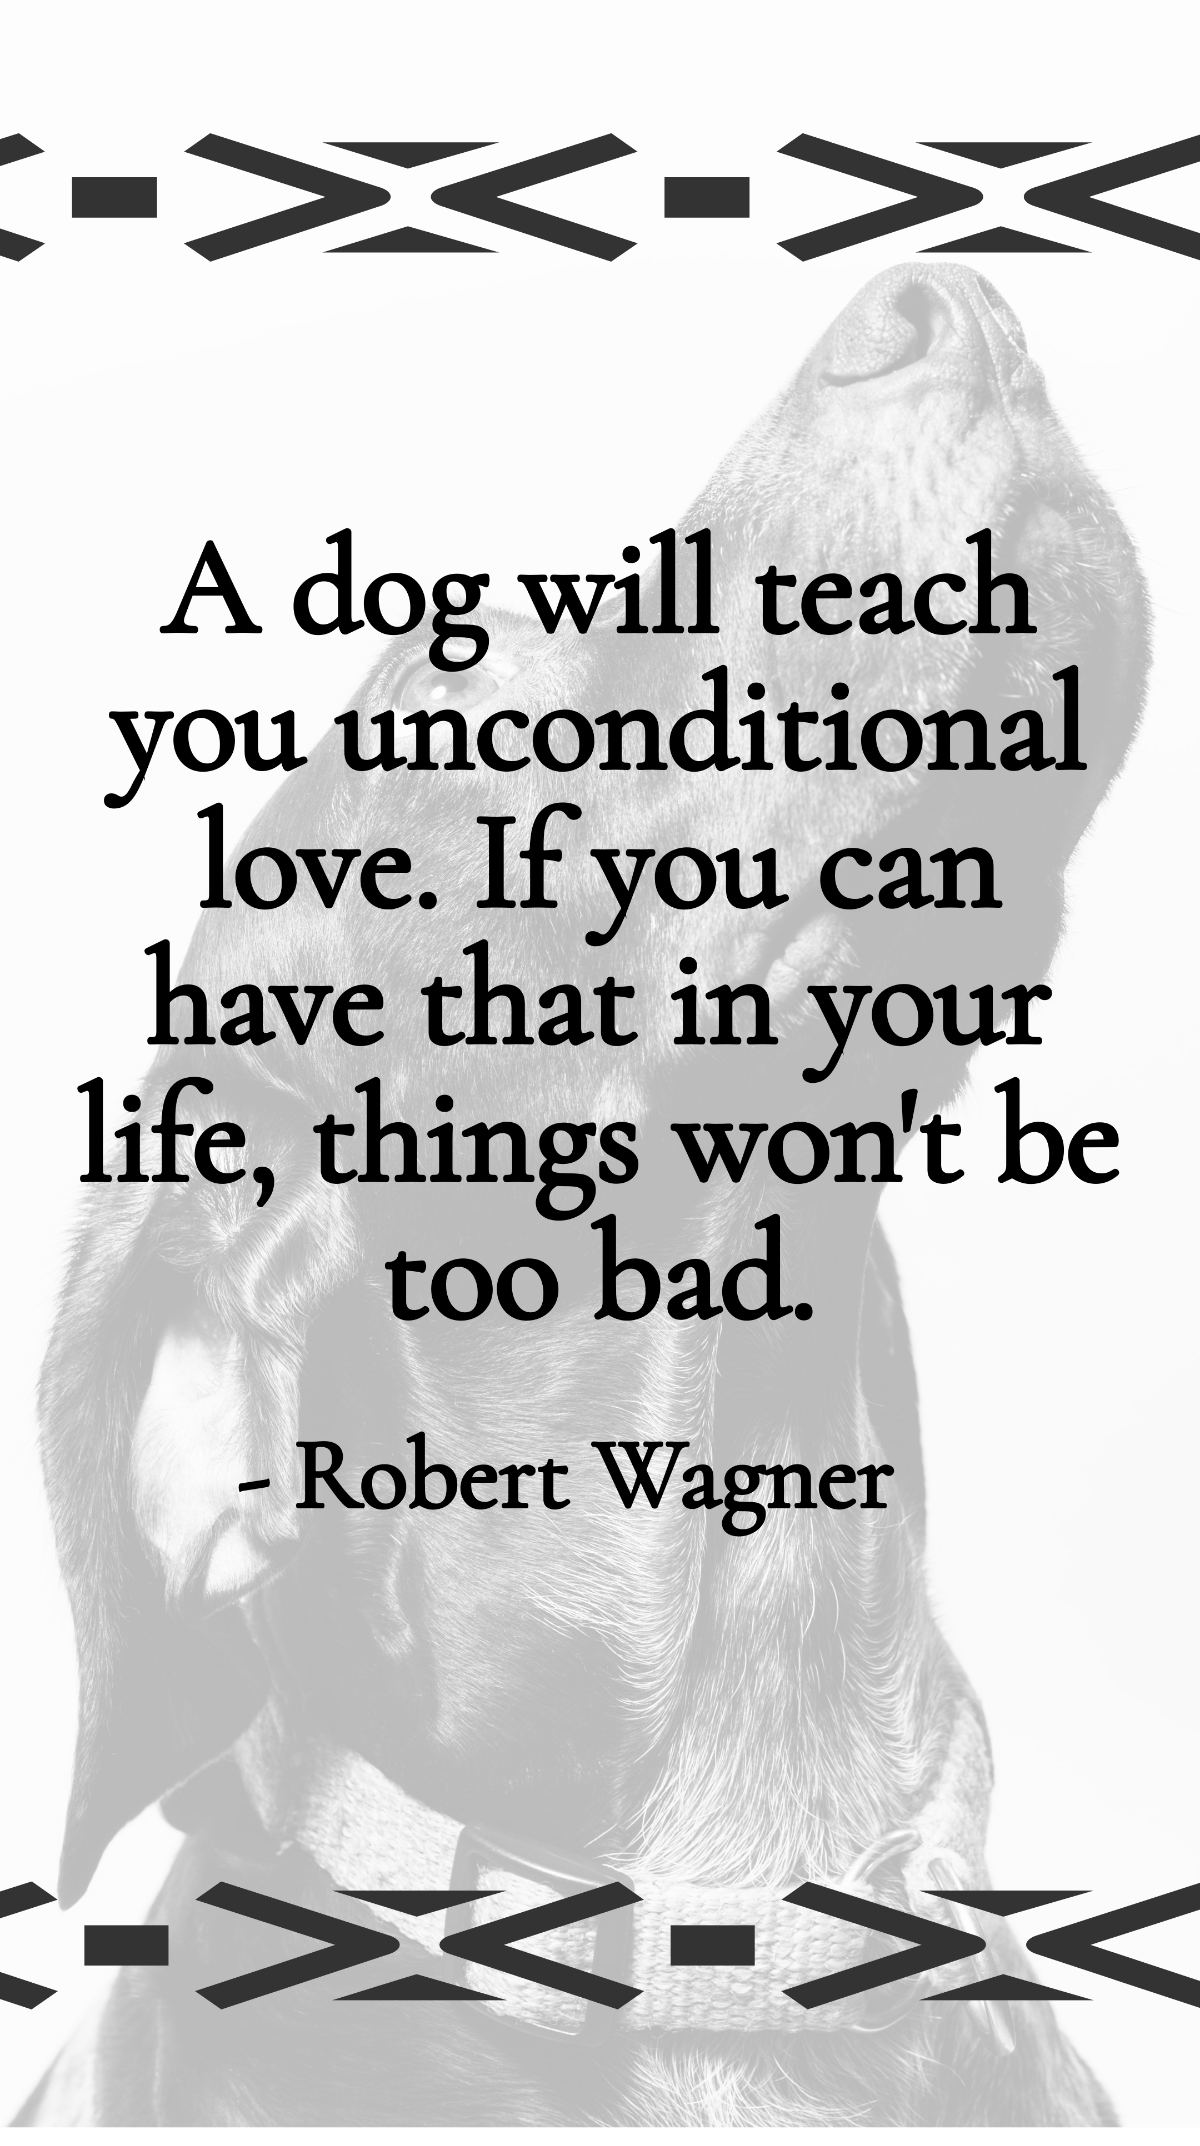 Robert Wagner - A dog will teach you unconditional love. If you can have that in your life, things won't be too bad. Template